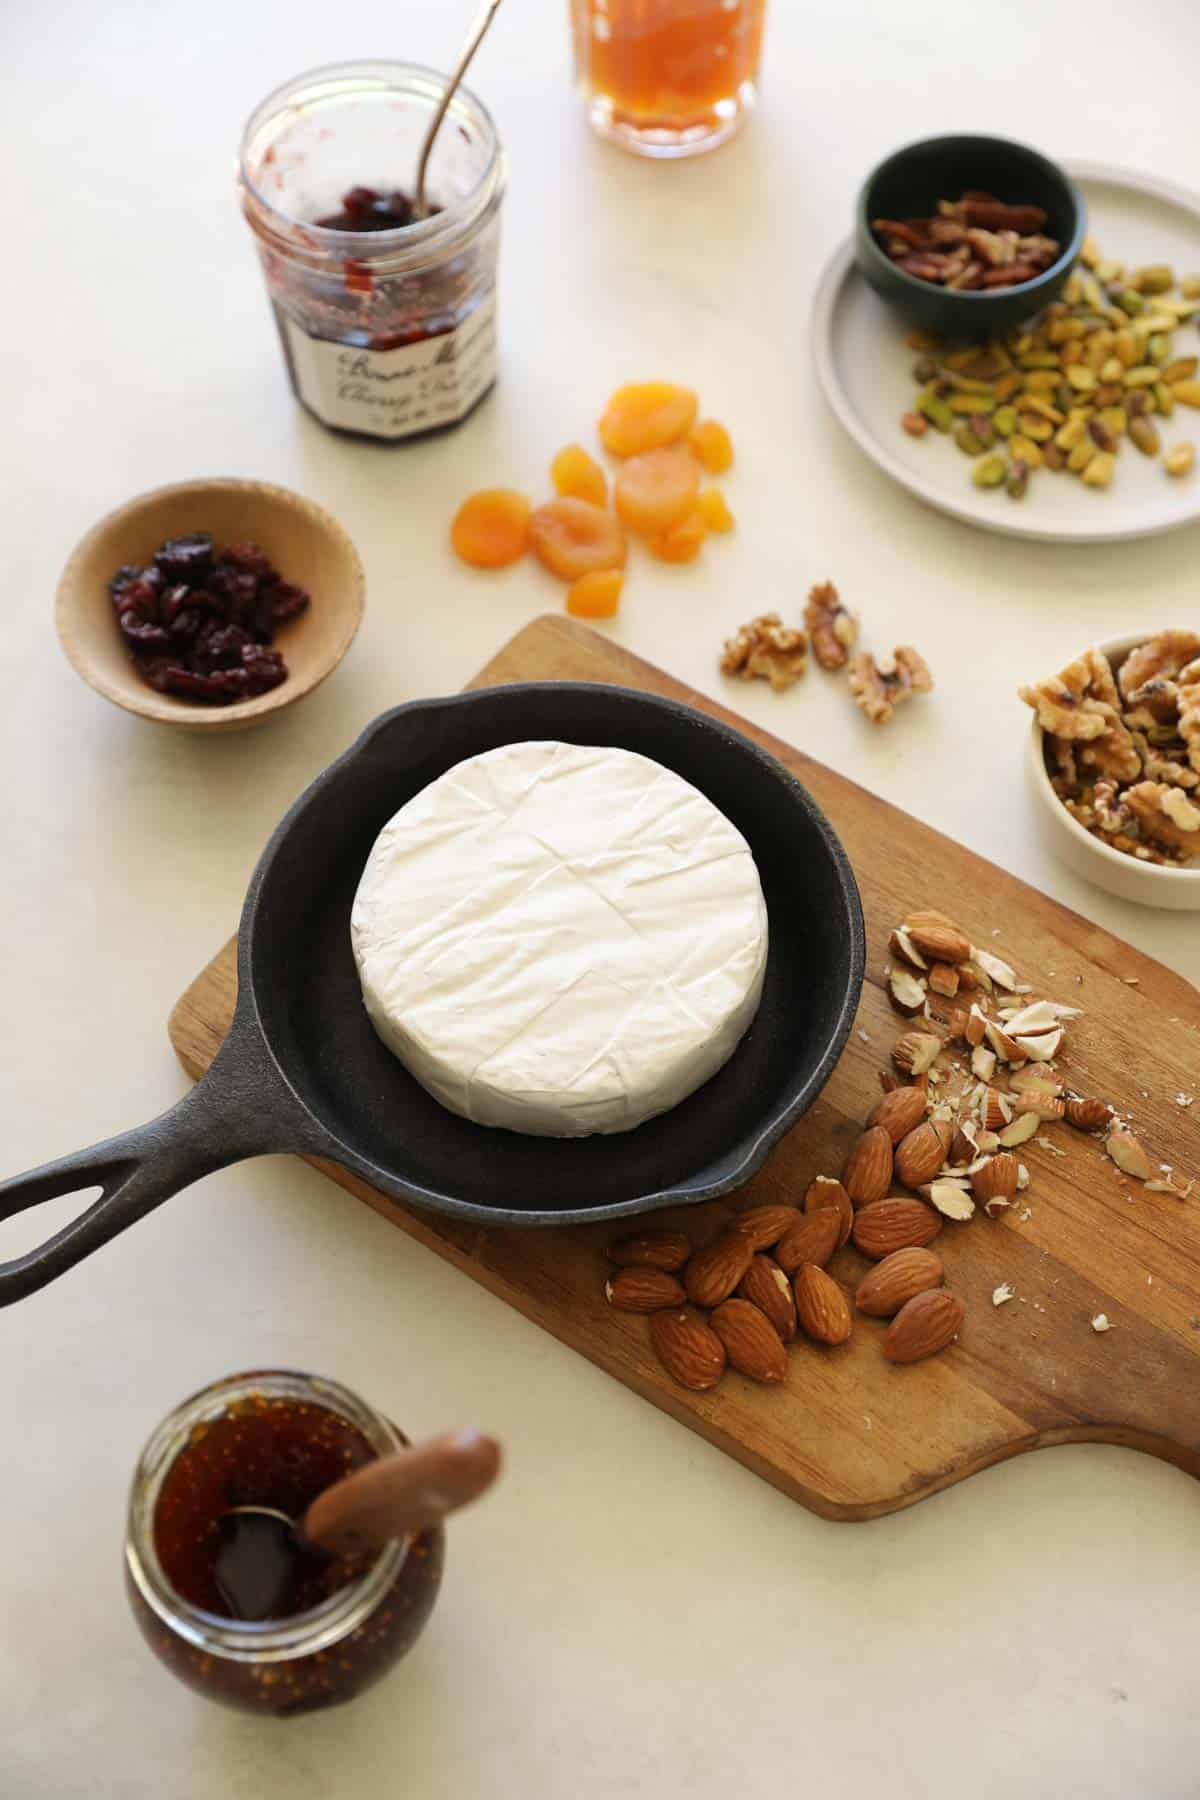 a counter with a skillet of brie showing the rind with jams and nuts